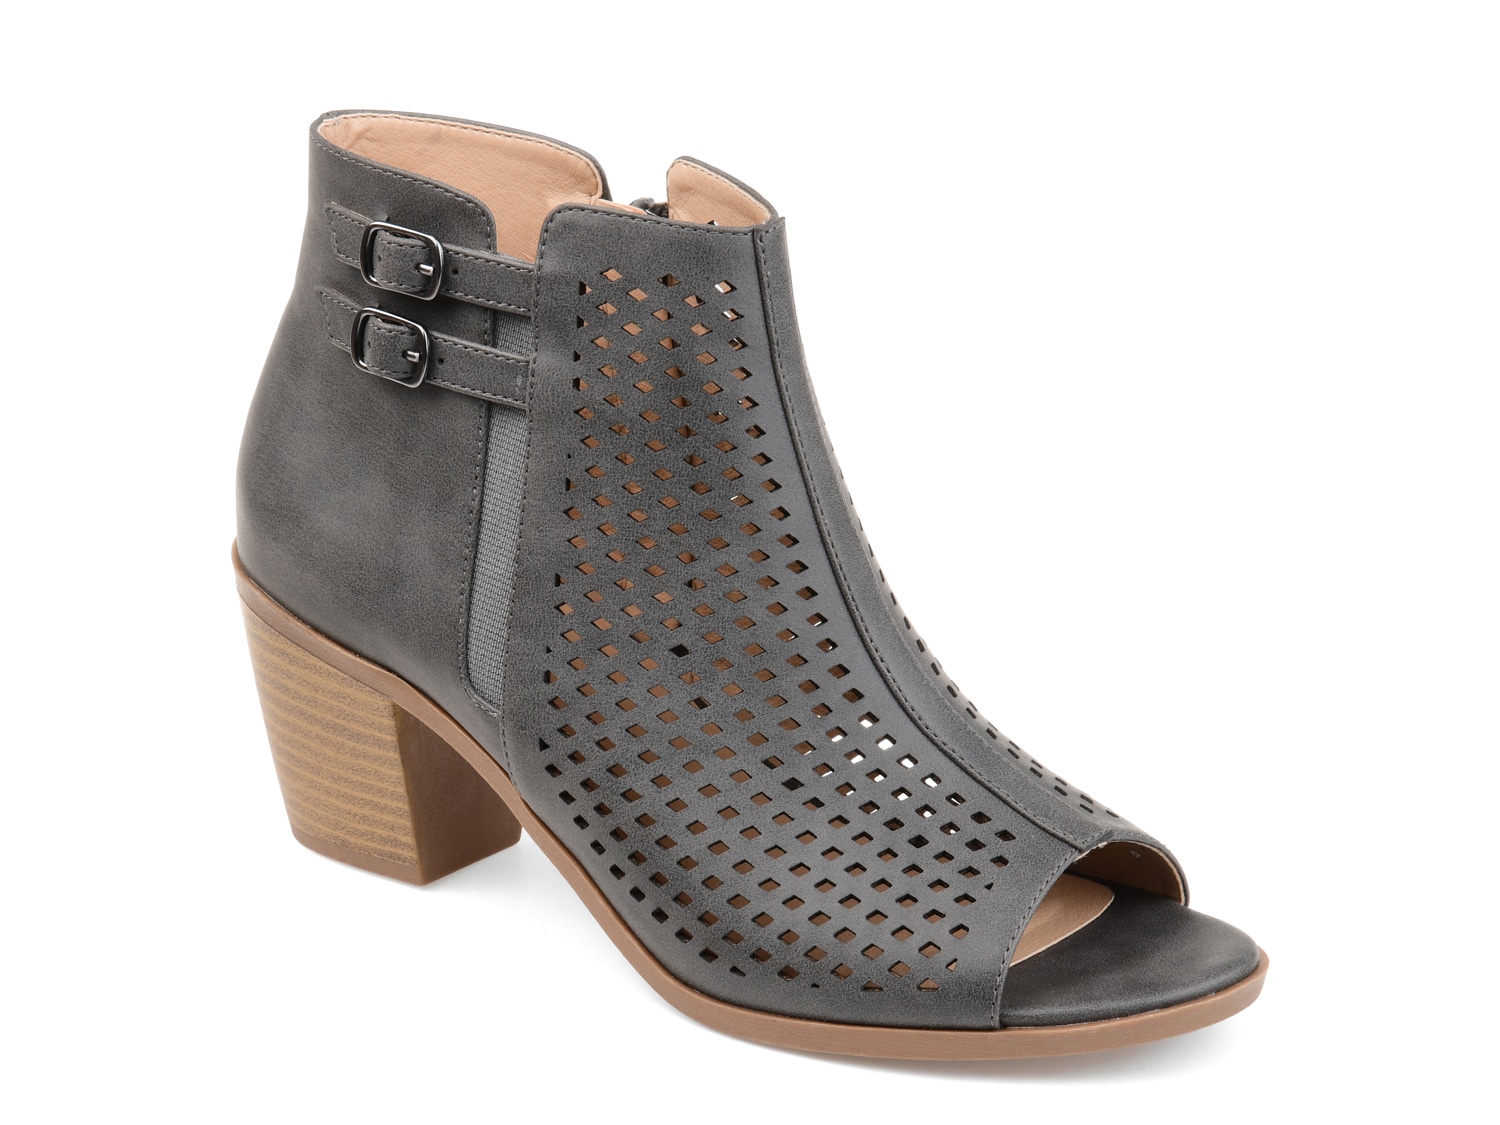 Journee Collection Harlem Bootie - Free Shipping | DSW